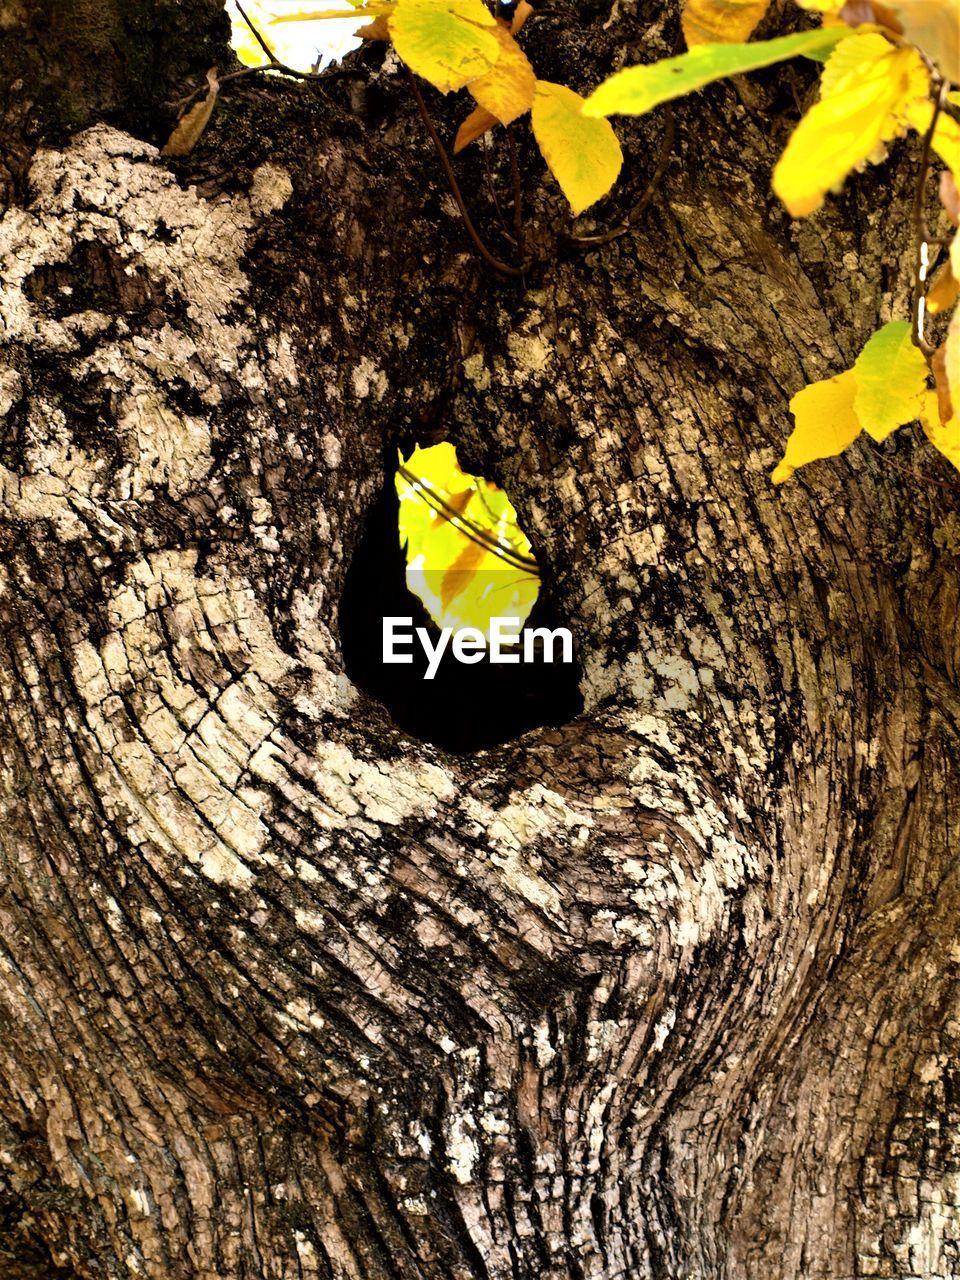 CLOSE-UP OF YELLOW LEAF ON TREE TRUNK WITH HOLE